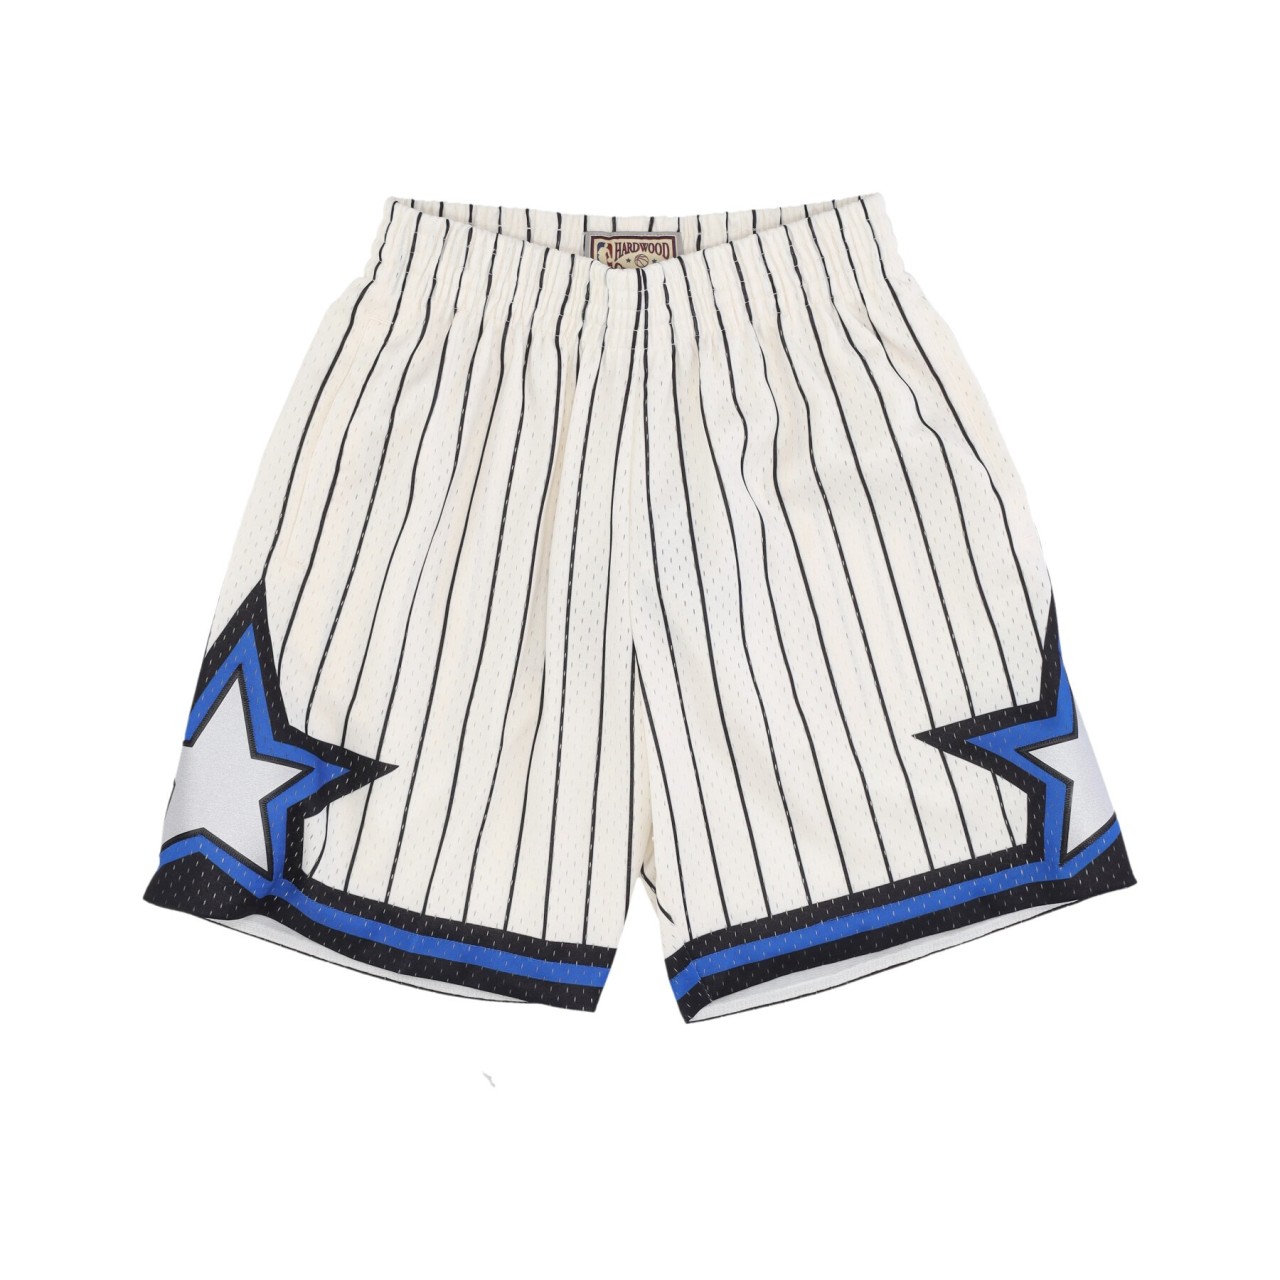 MITCHELL & NESS NBA OFF WHITE TEAM COLOR SWINGMAN SHORTS HARDWOOD CLASSICS 1993 ORLMAG SMSH5054-OMA93PPPOFWH